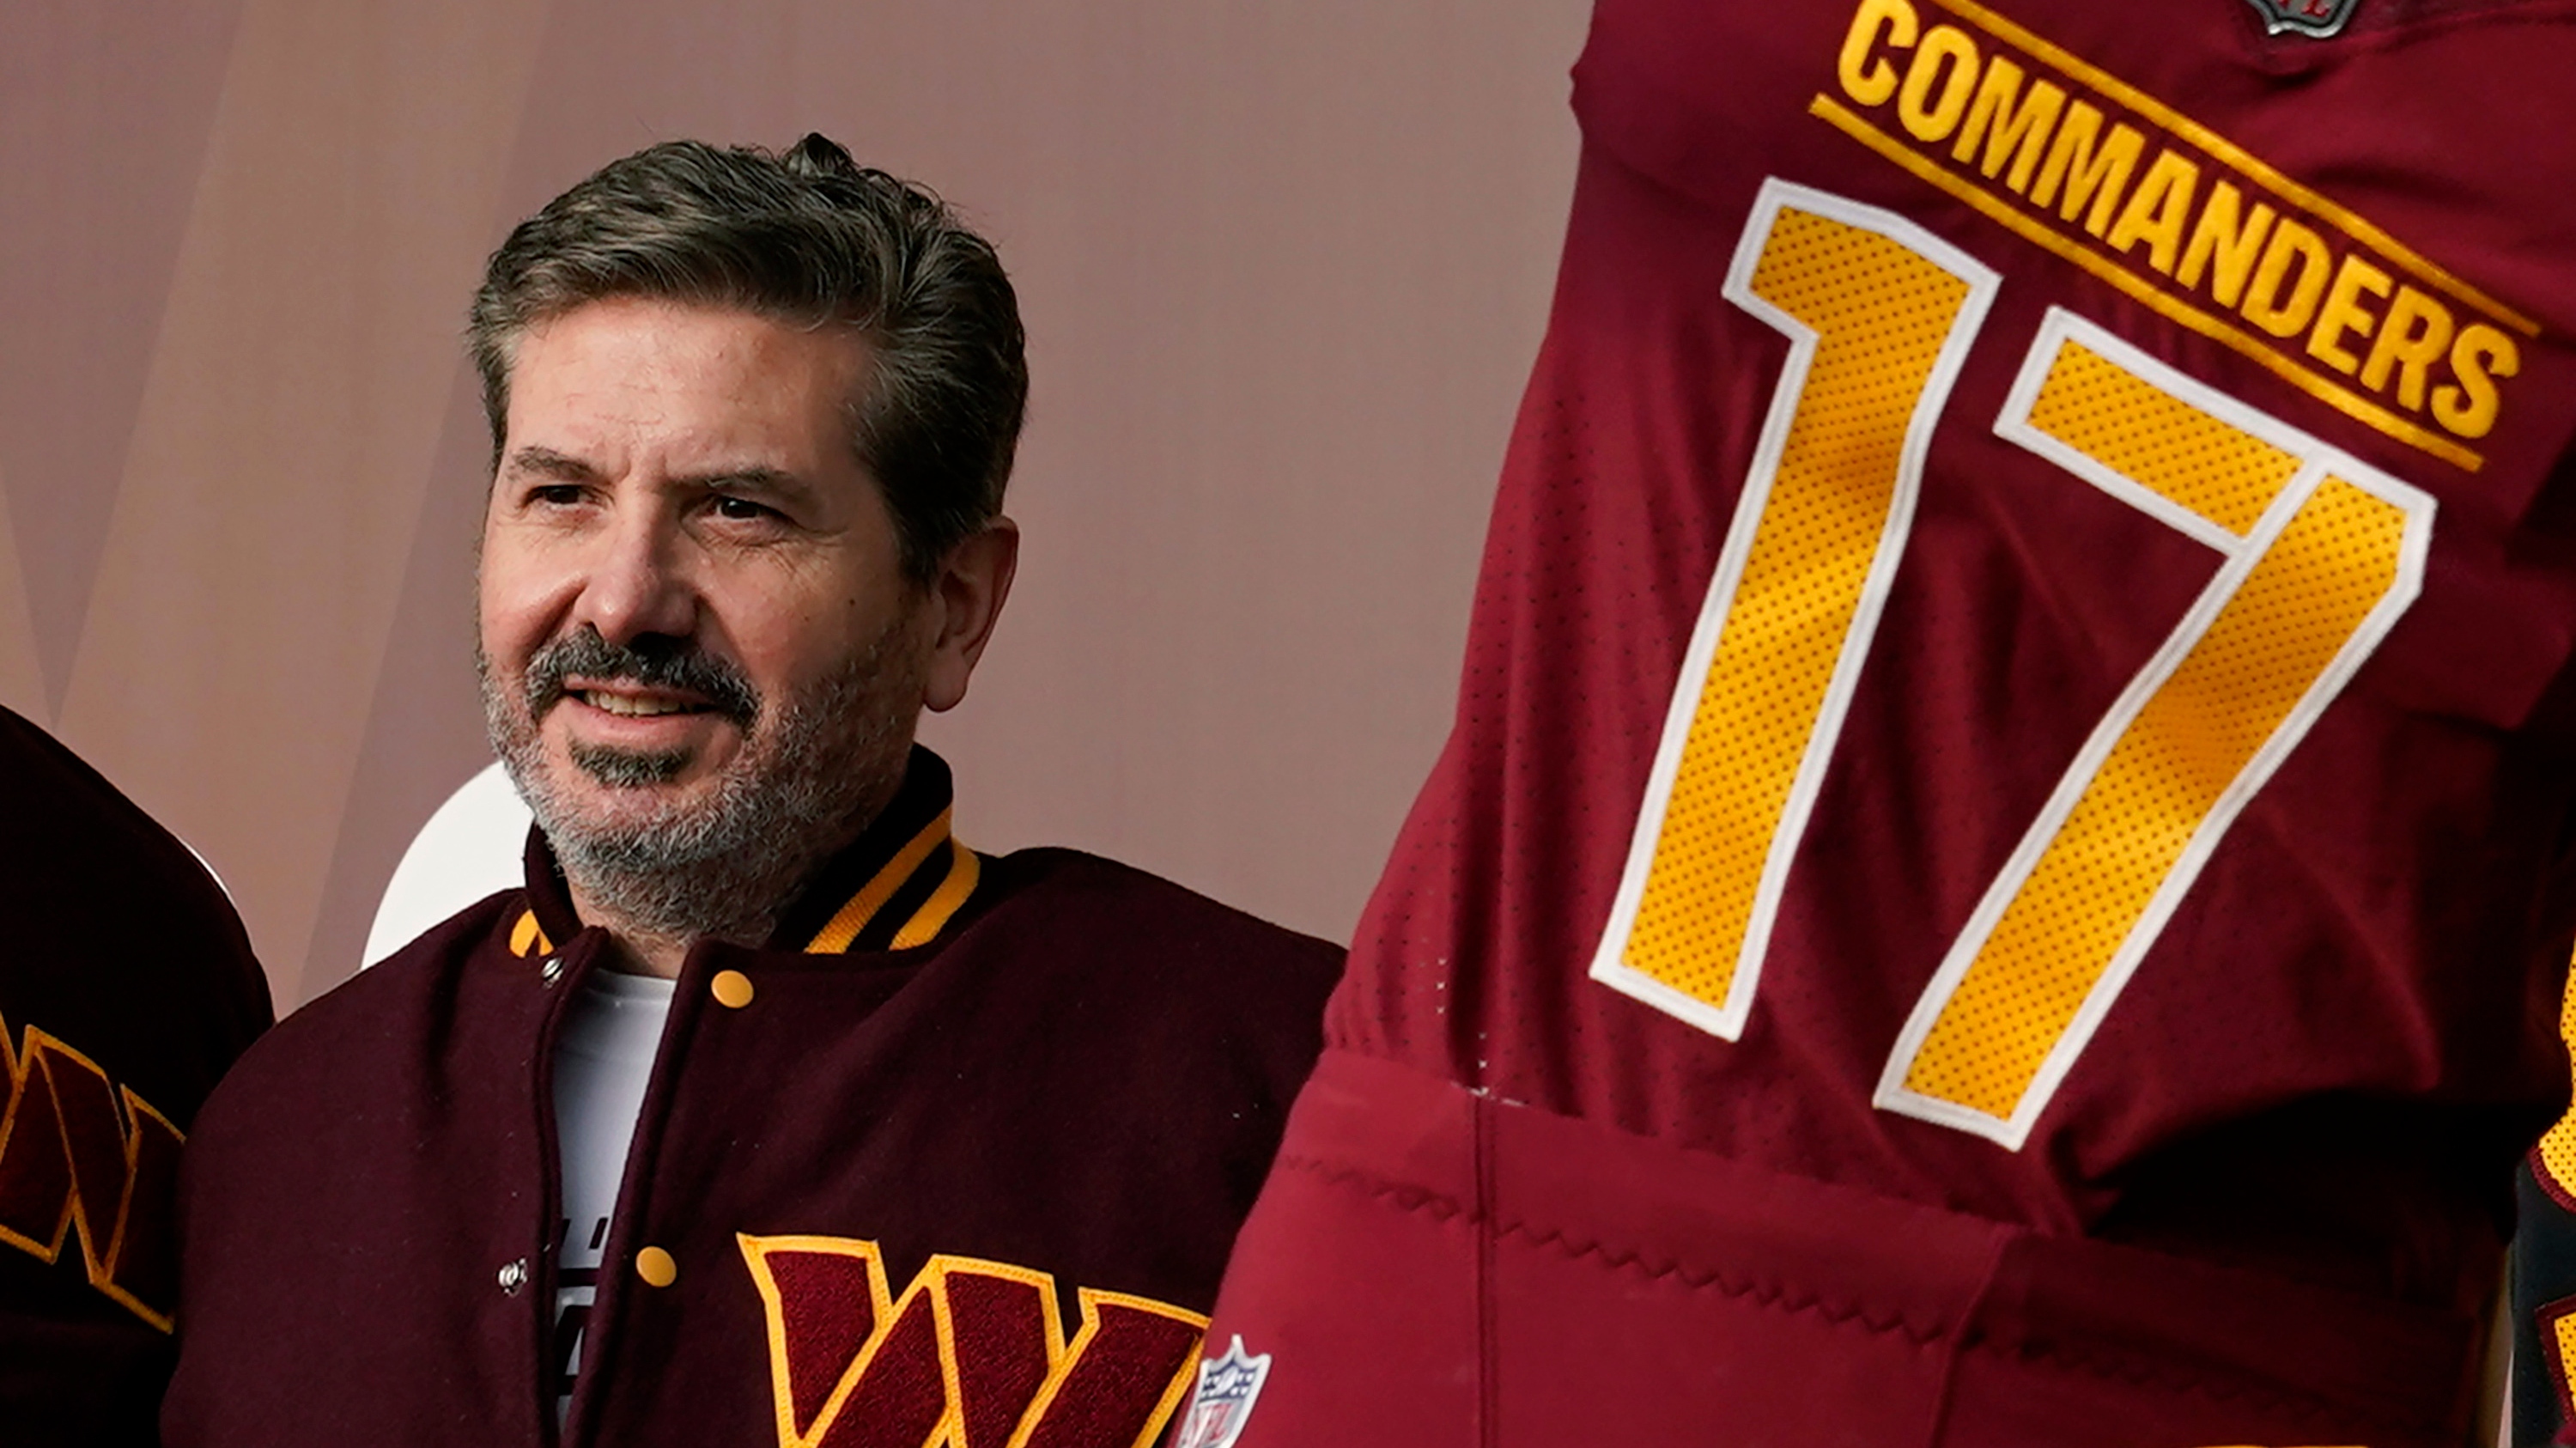 Dan Snyder Sends Letter to NFL Owners After Private Investigator's